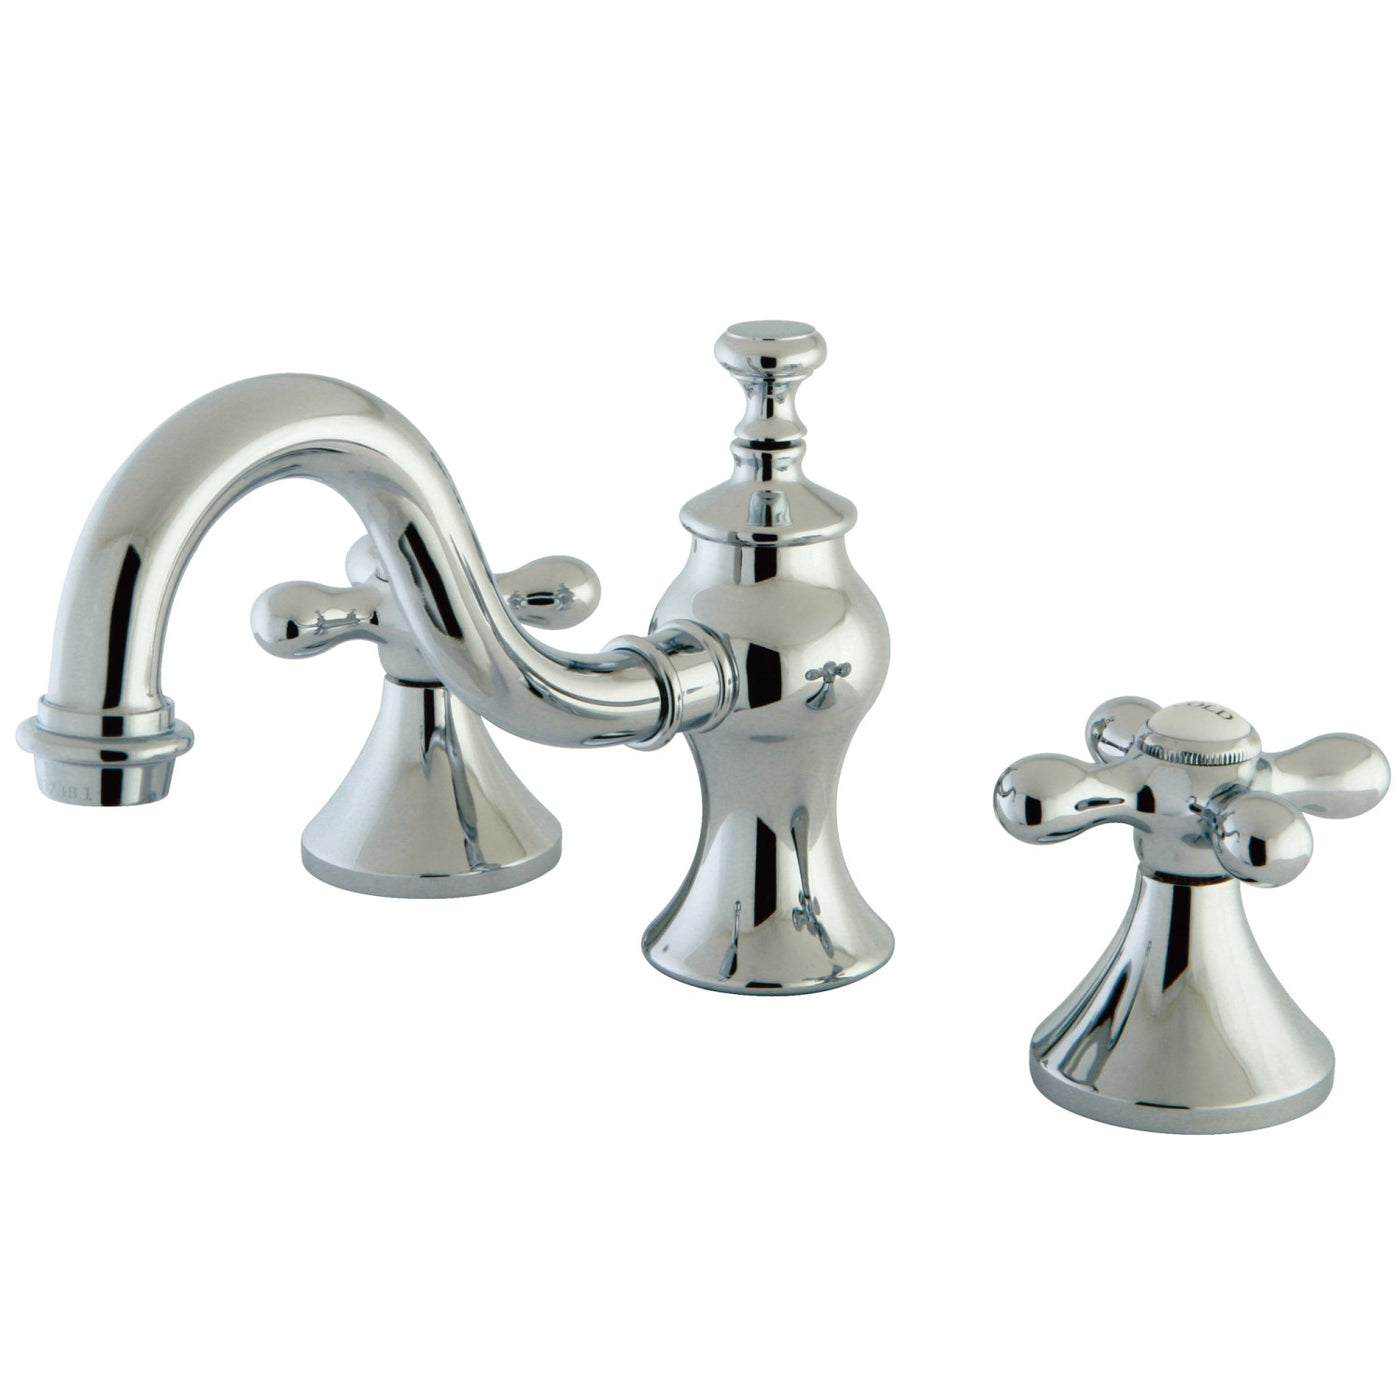 Elements of Design EC7161AX Widespread Bathroom Faucet with Brass Pop-Up, Polished Chrome